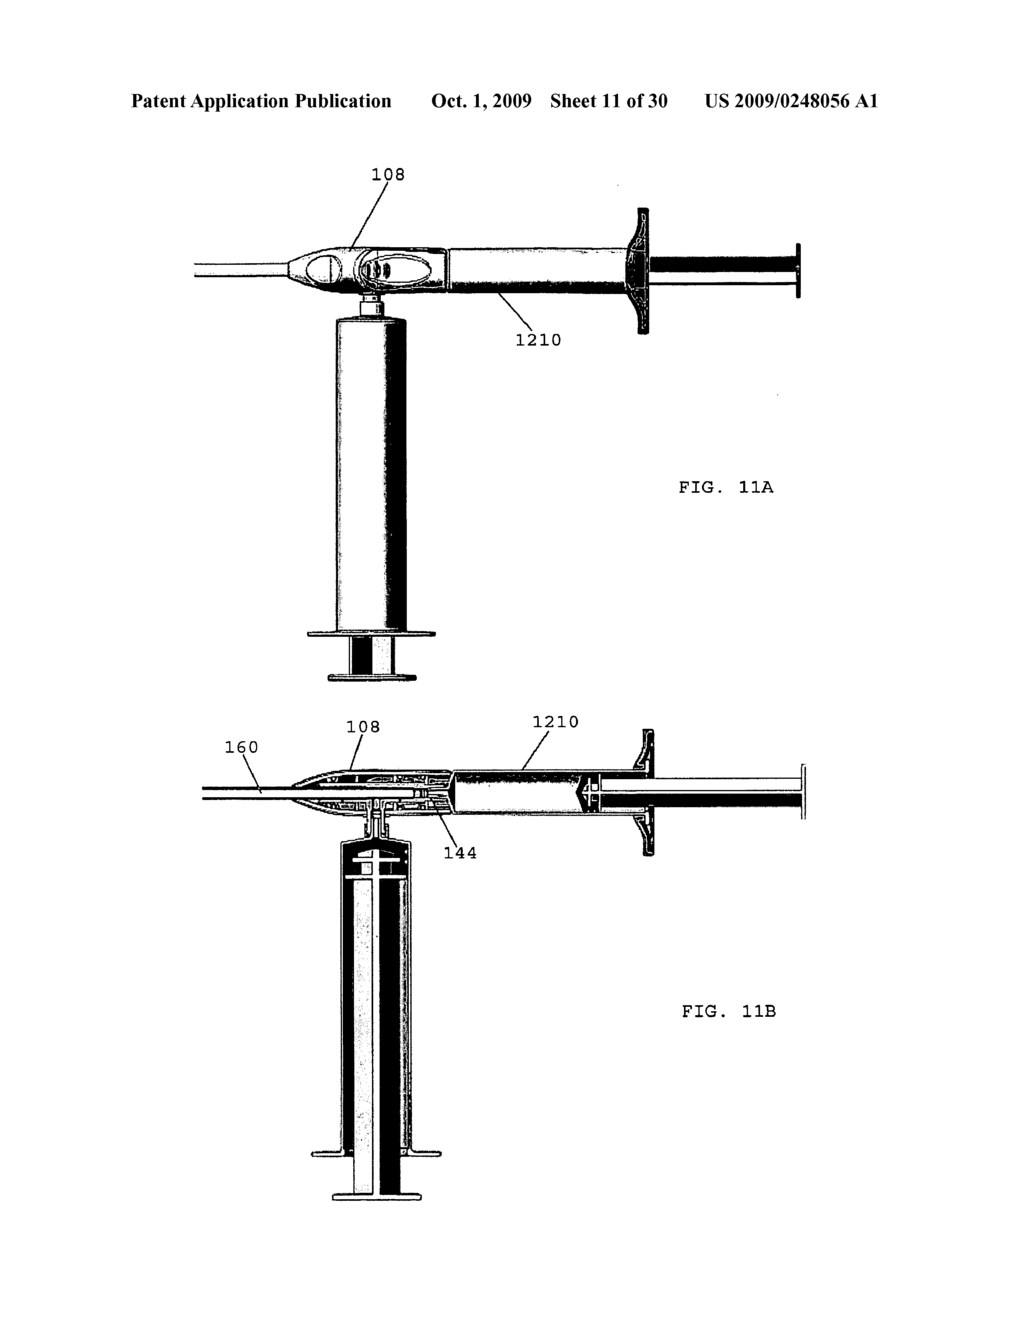 APPLICATOR INSTRUMENTS FOR CONTROLLING BLEEDING AT SURGICAL SITES AND METHODS THEREFOR - diagram, schematic, and image 12